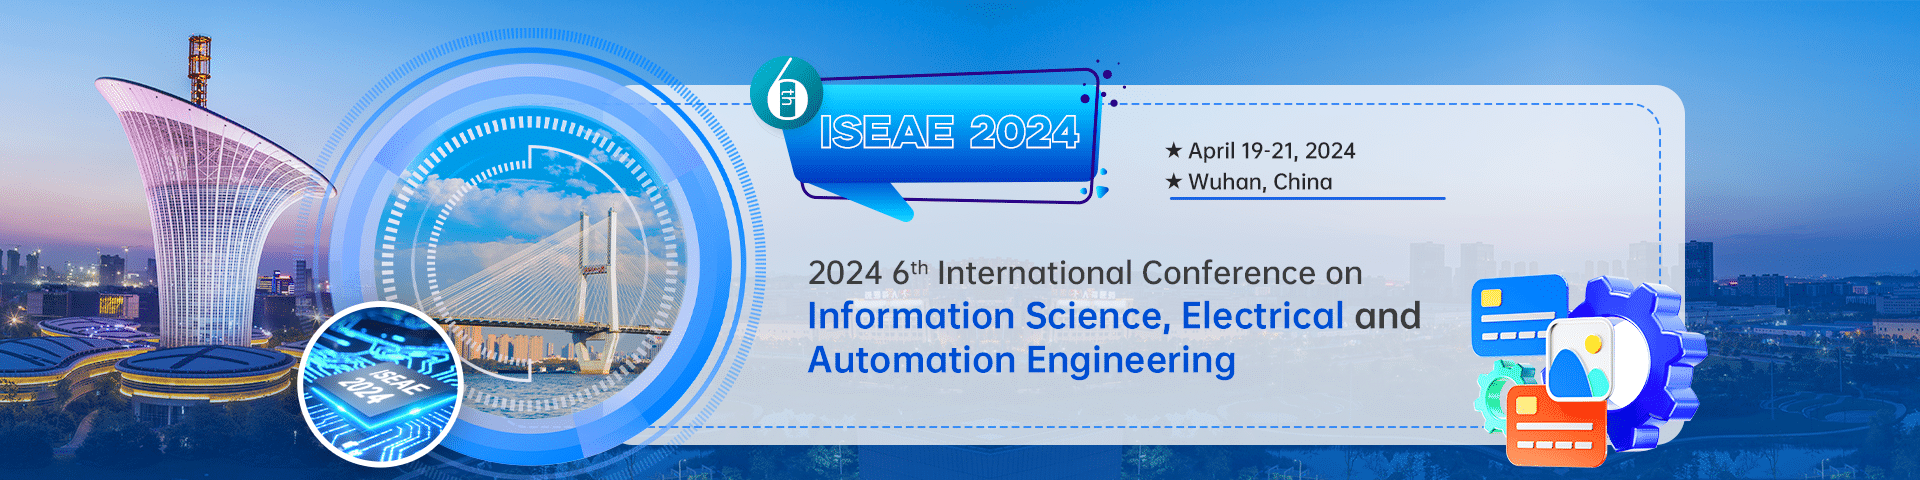 2024 6th International Conference on Information Science, Electrical and Automation Engineering(ISEAE 2024)